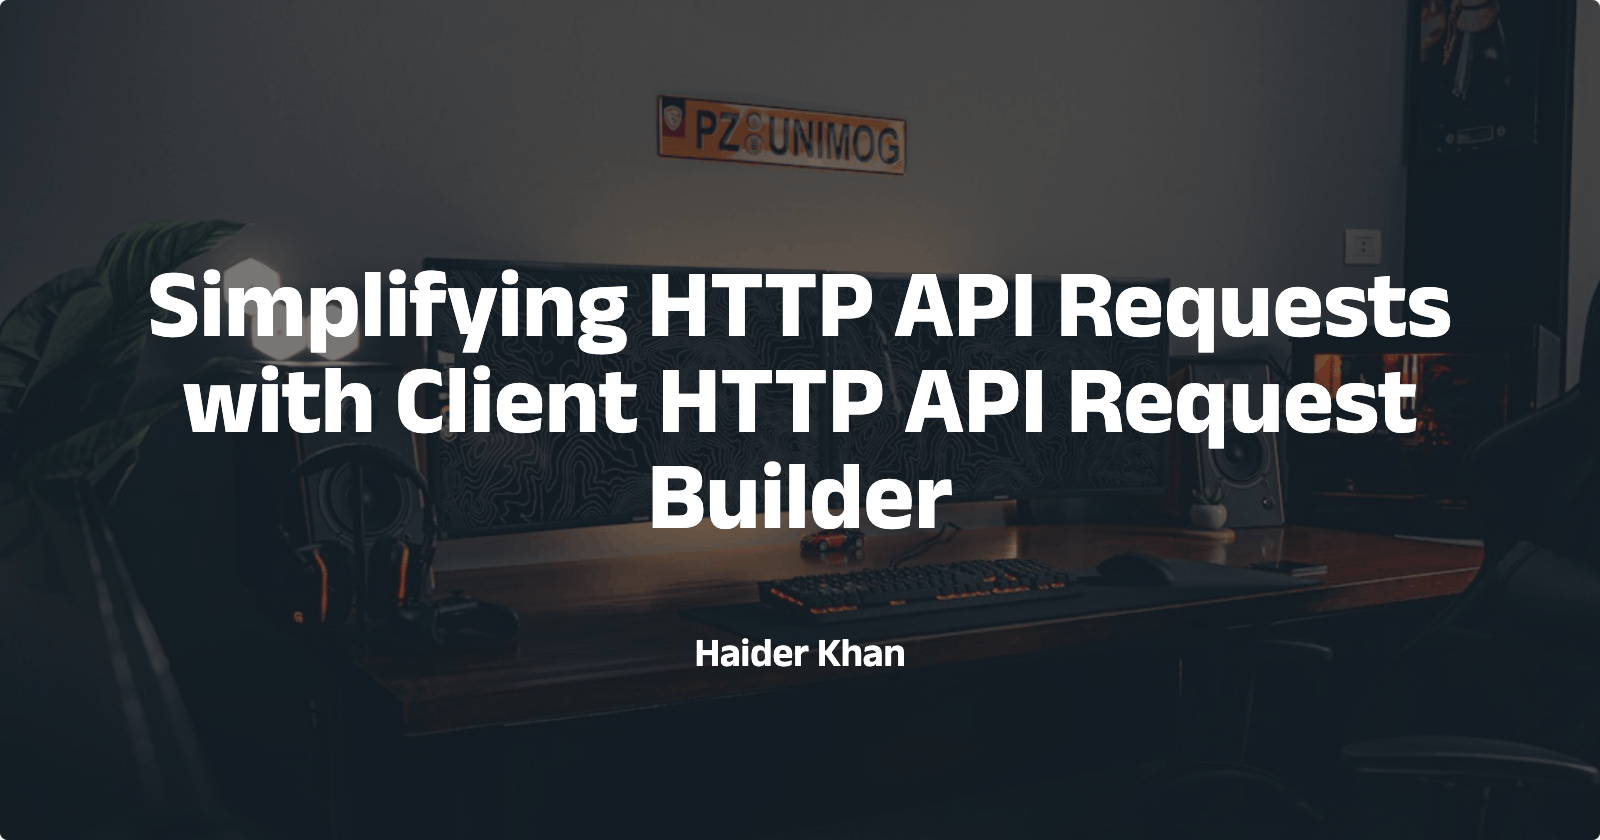 Simplifying HTTP API Requests with Client HTTP API Request Builder